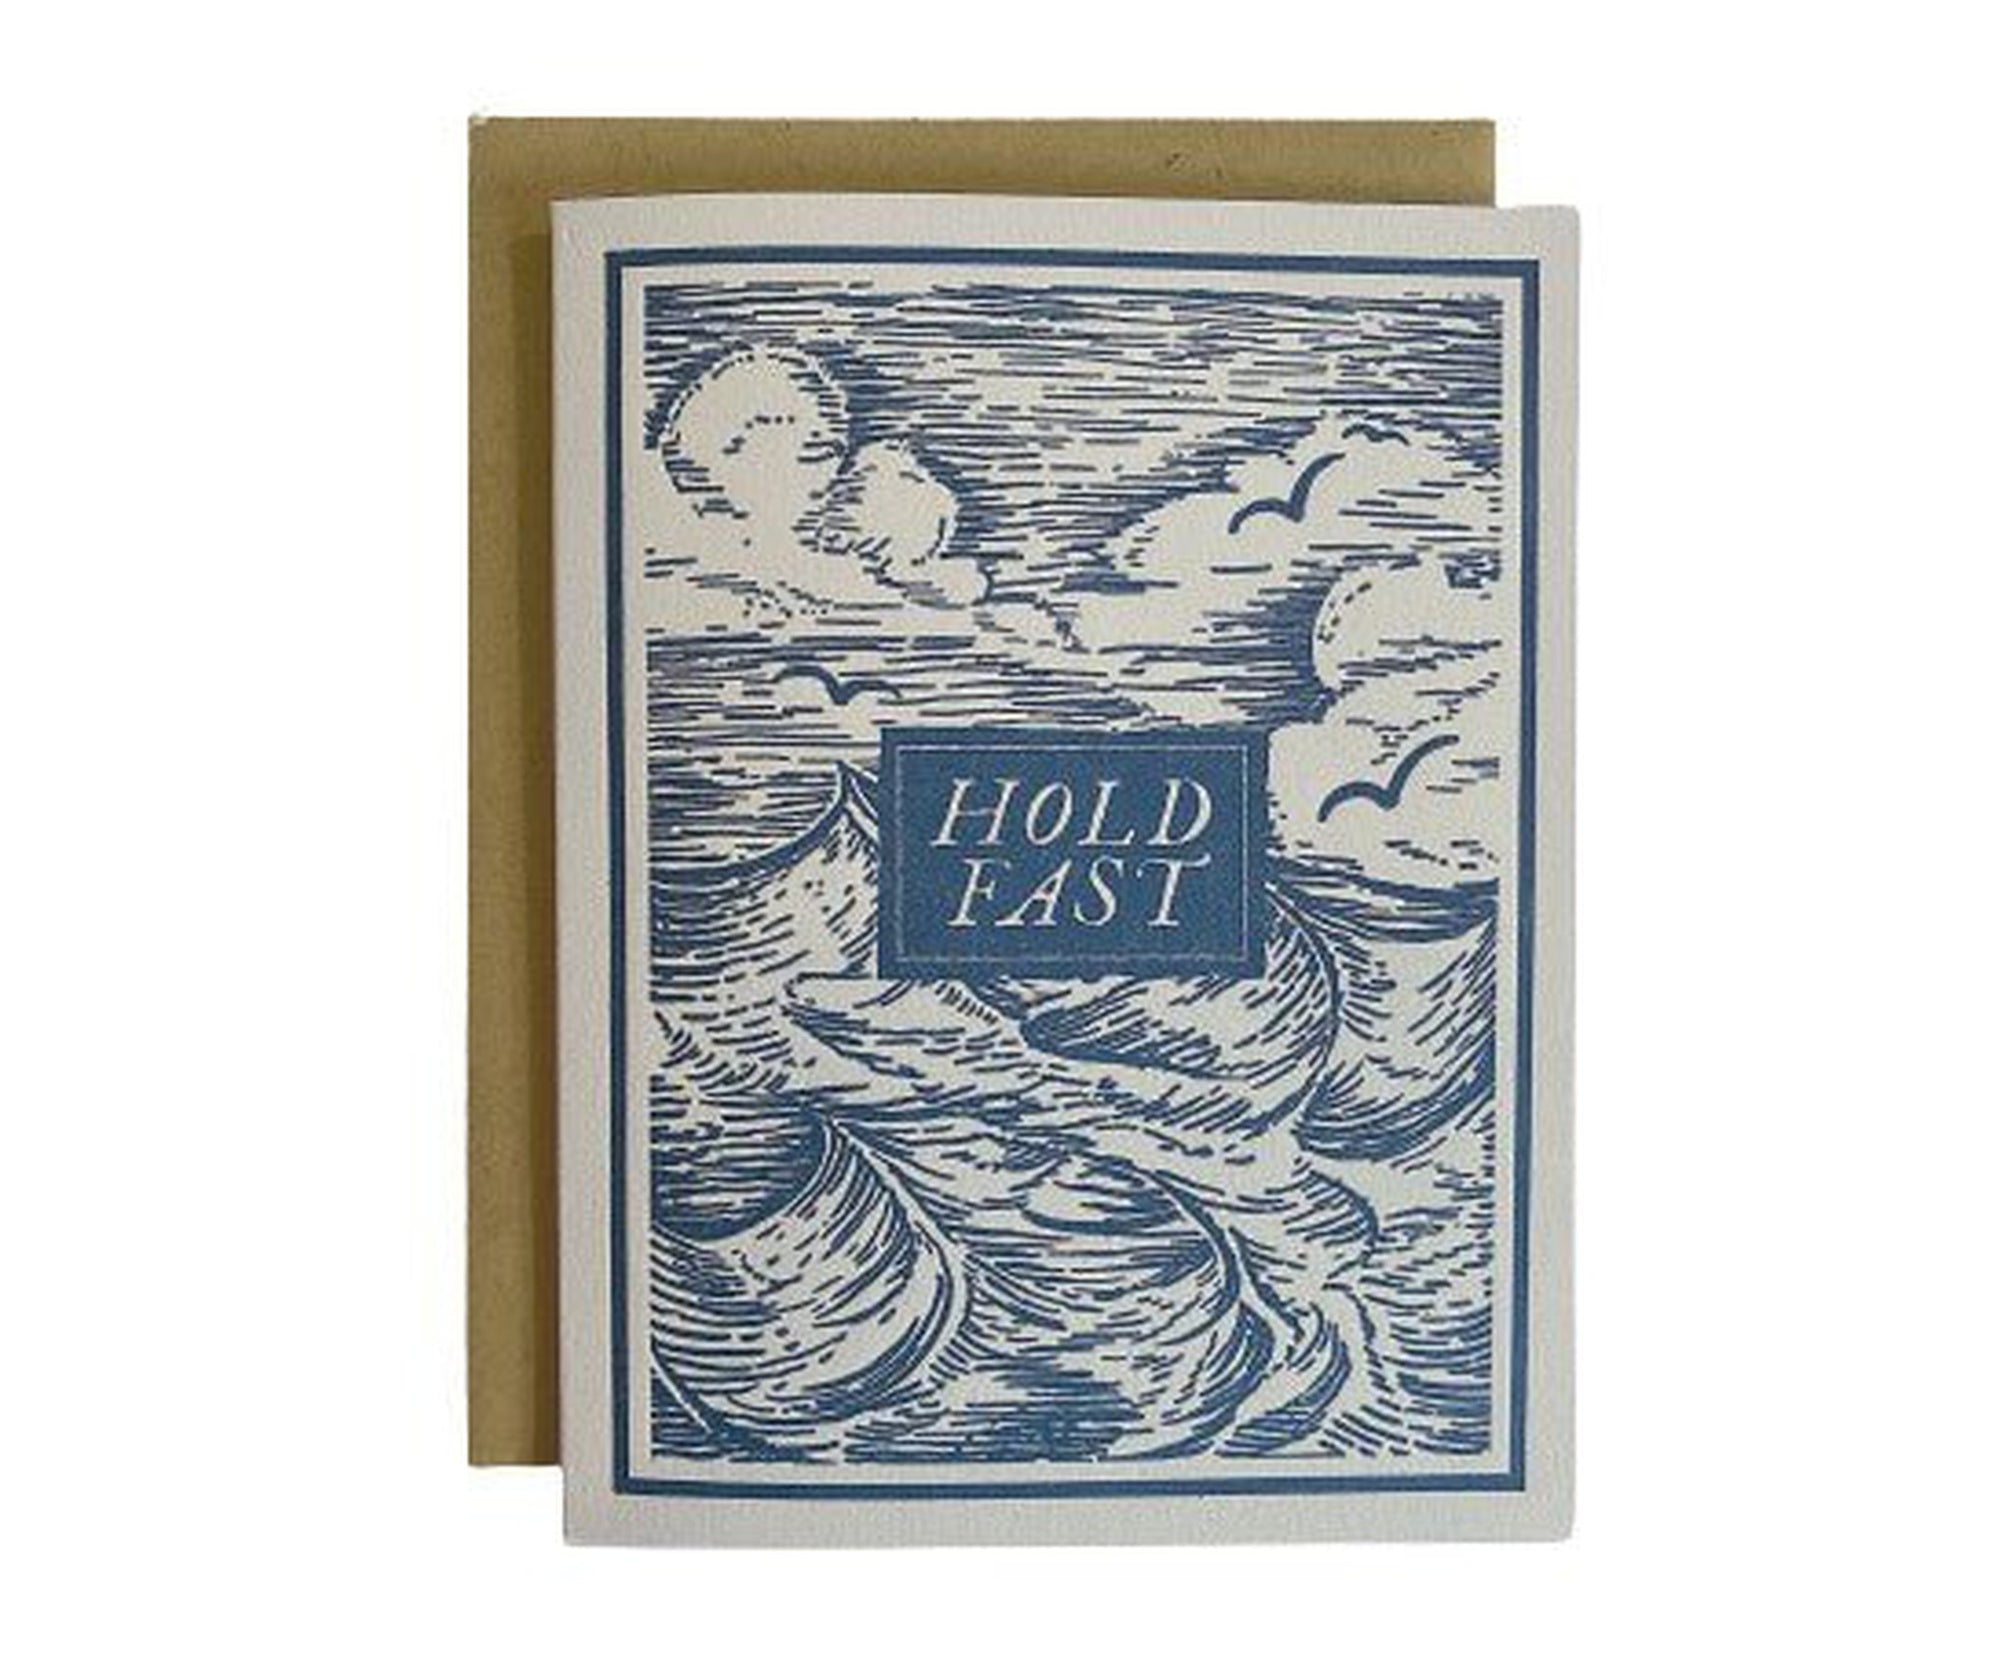 A Hold Fast Encouragement Greeting Card by The Wild Wander